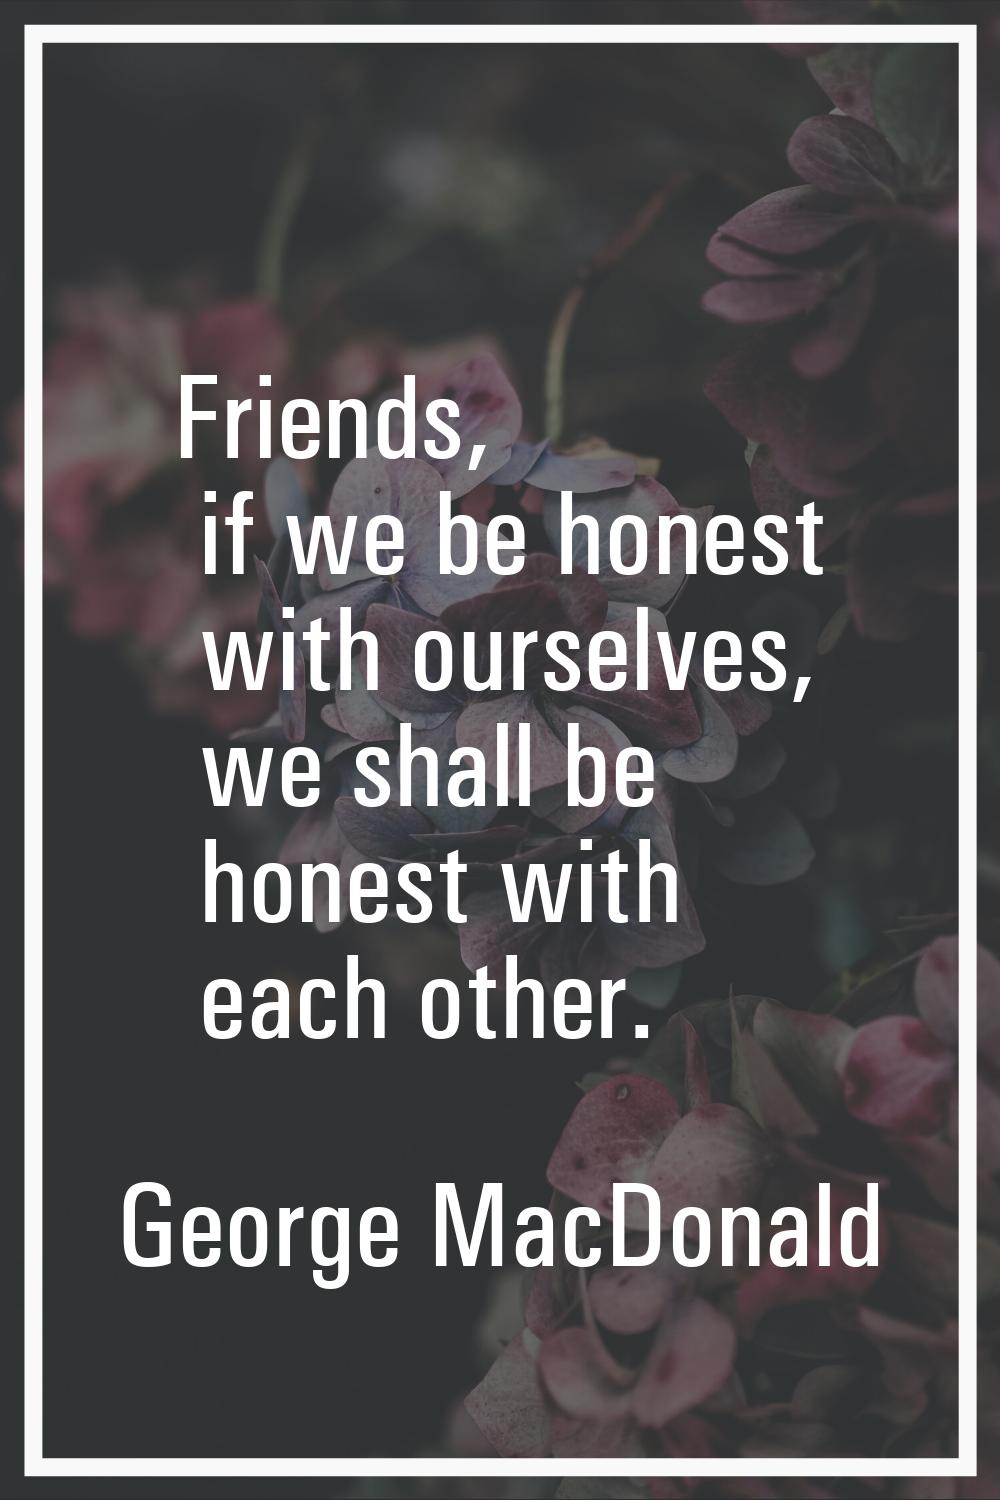 Friends, if we be honest with ourselves, we shall be honest with each other.